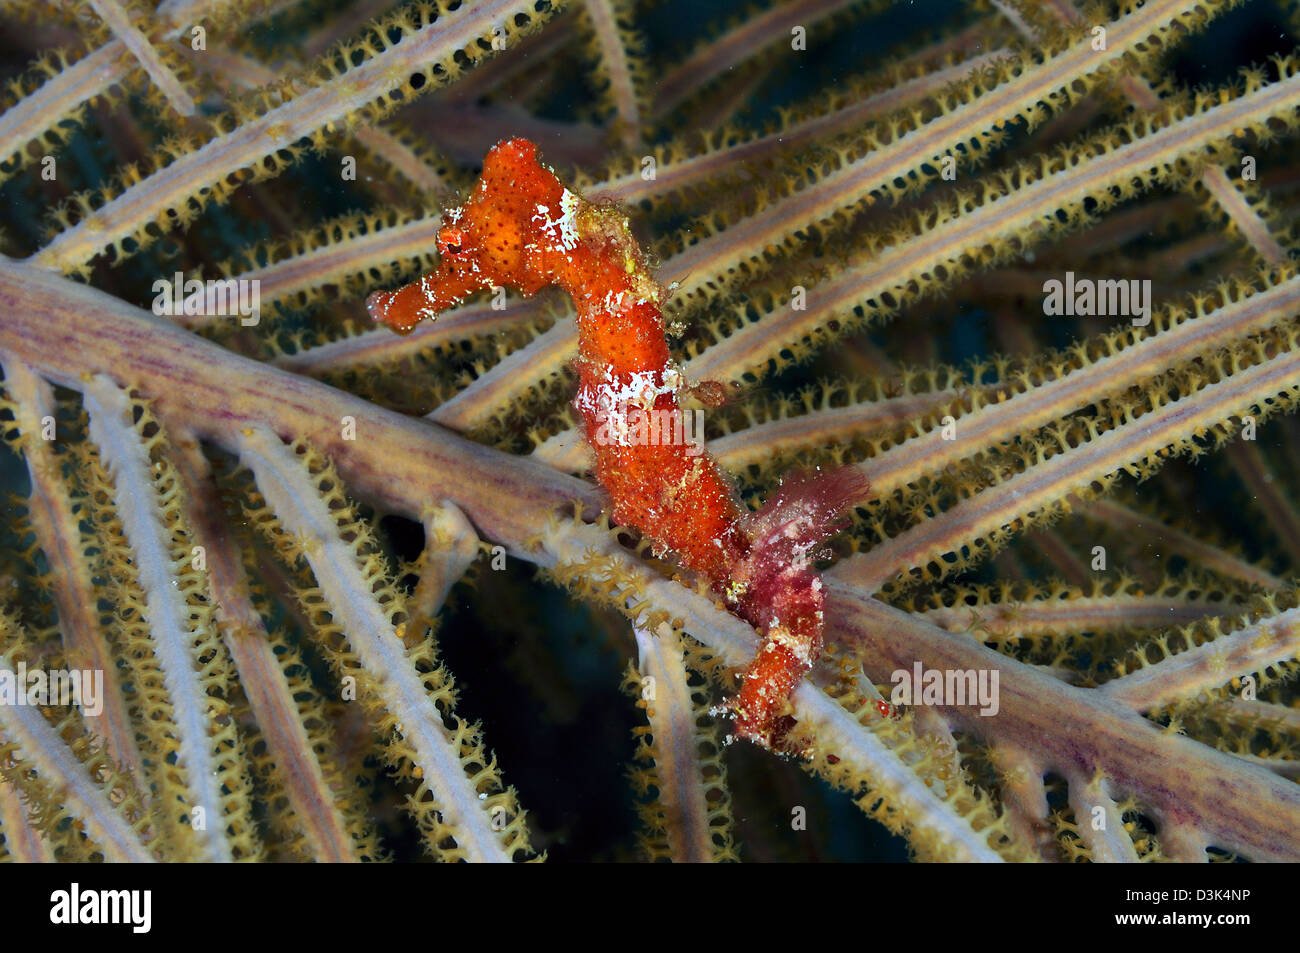 Red seahorse on Caribbean reef. Stock Photo